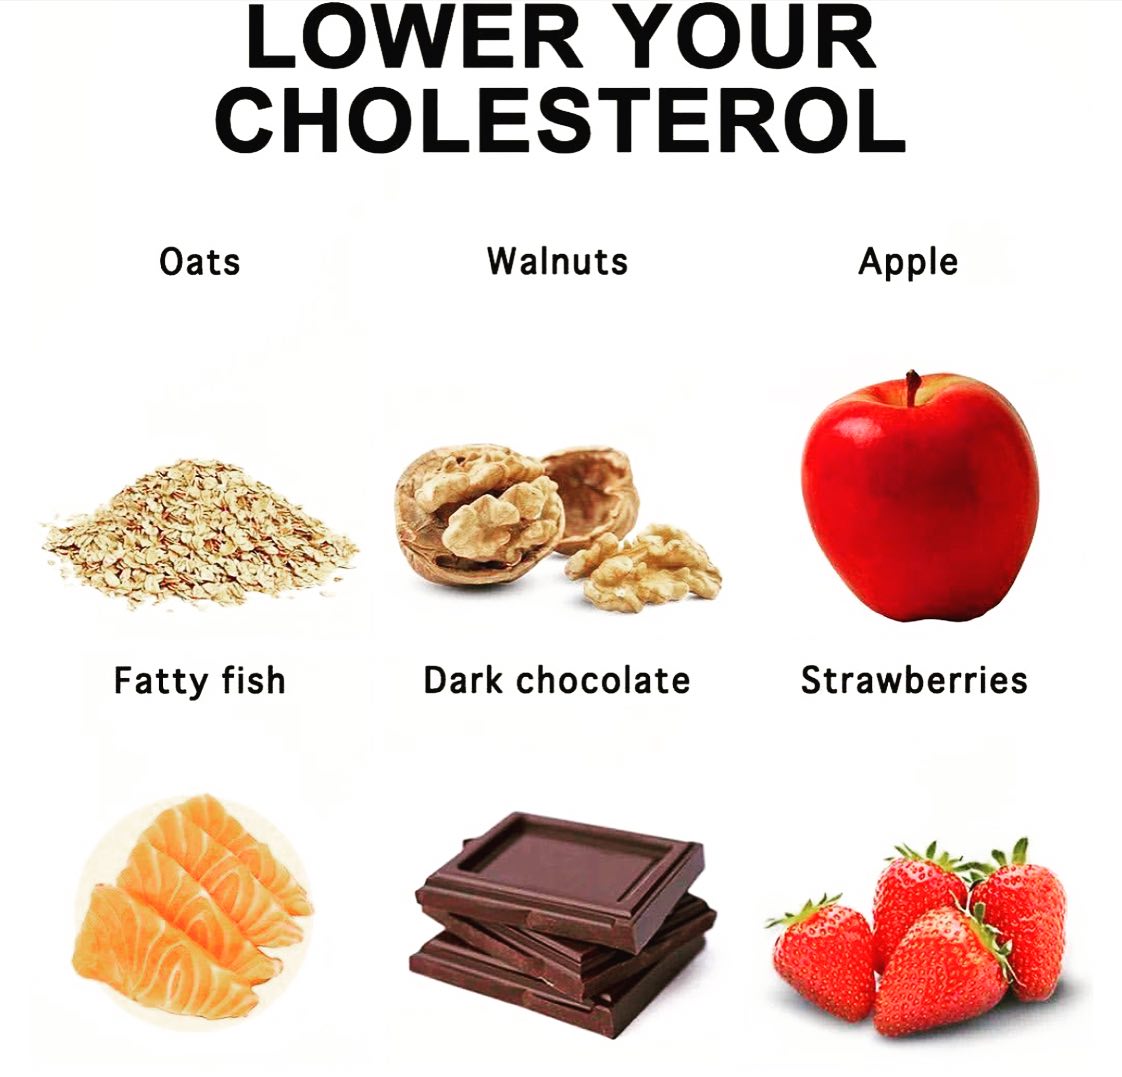 ✨👉Lower your cholesterol, elevate your health! 🌱💙 Take charge of your well-being today! 
#HeartHealth #CholesterolControl #HealthyLiving 🌟🌟